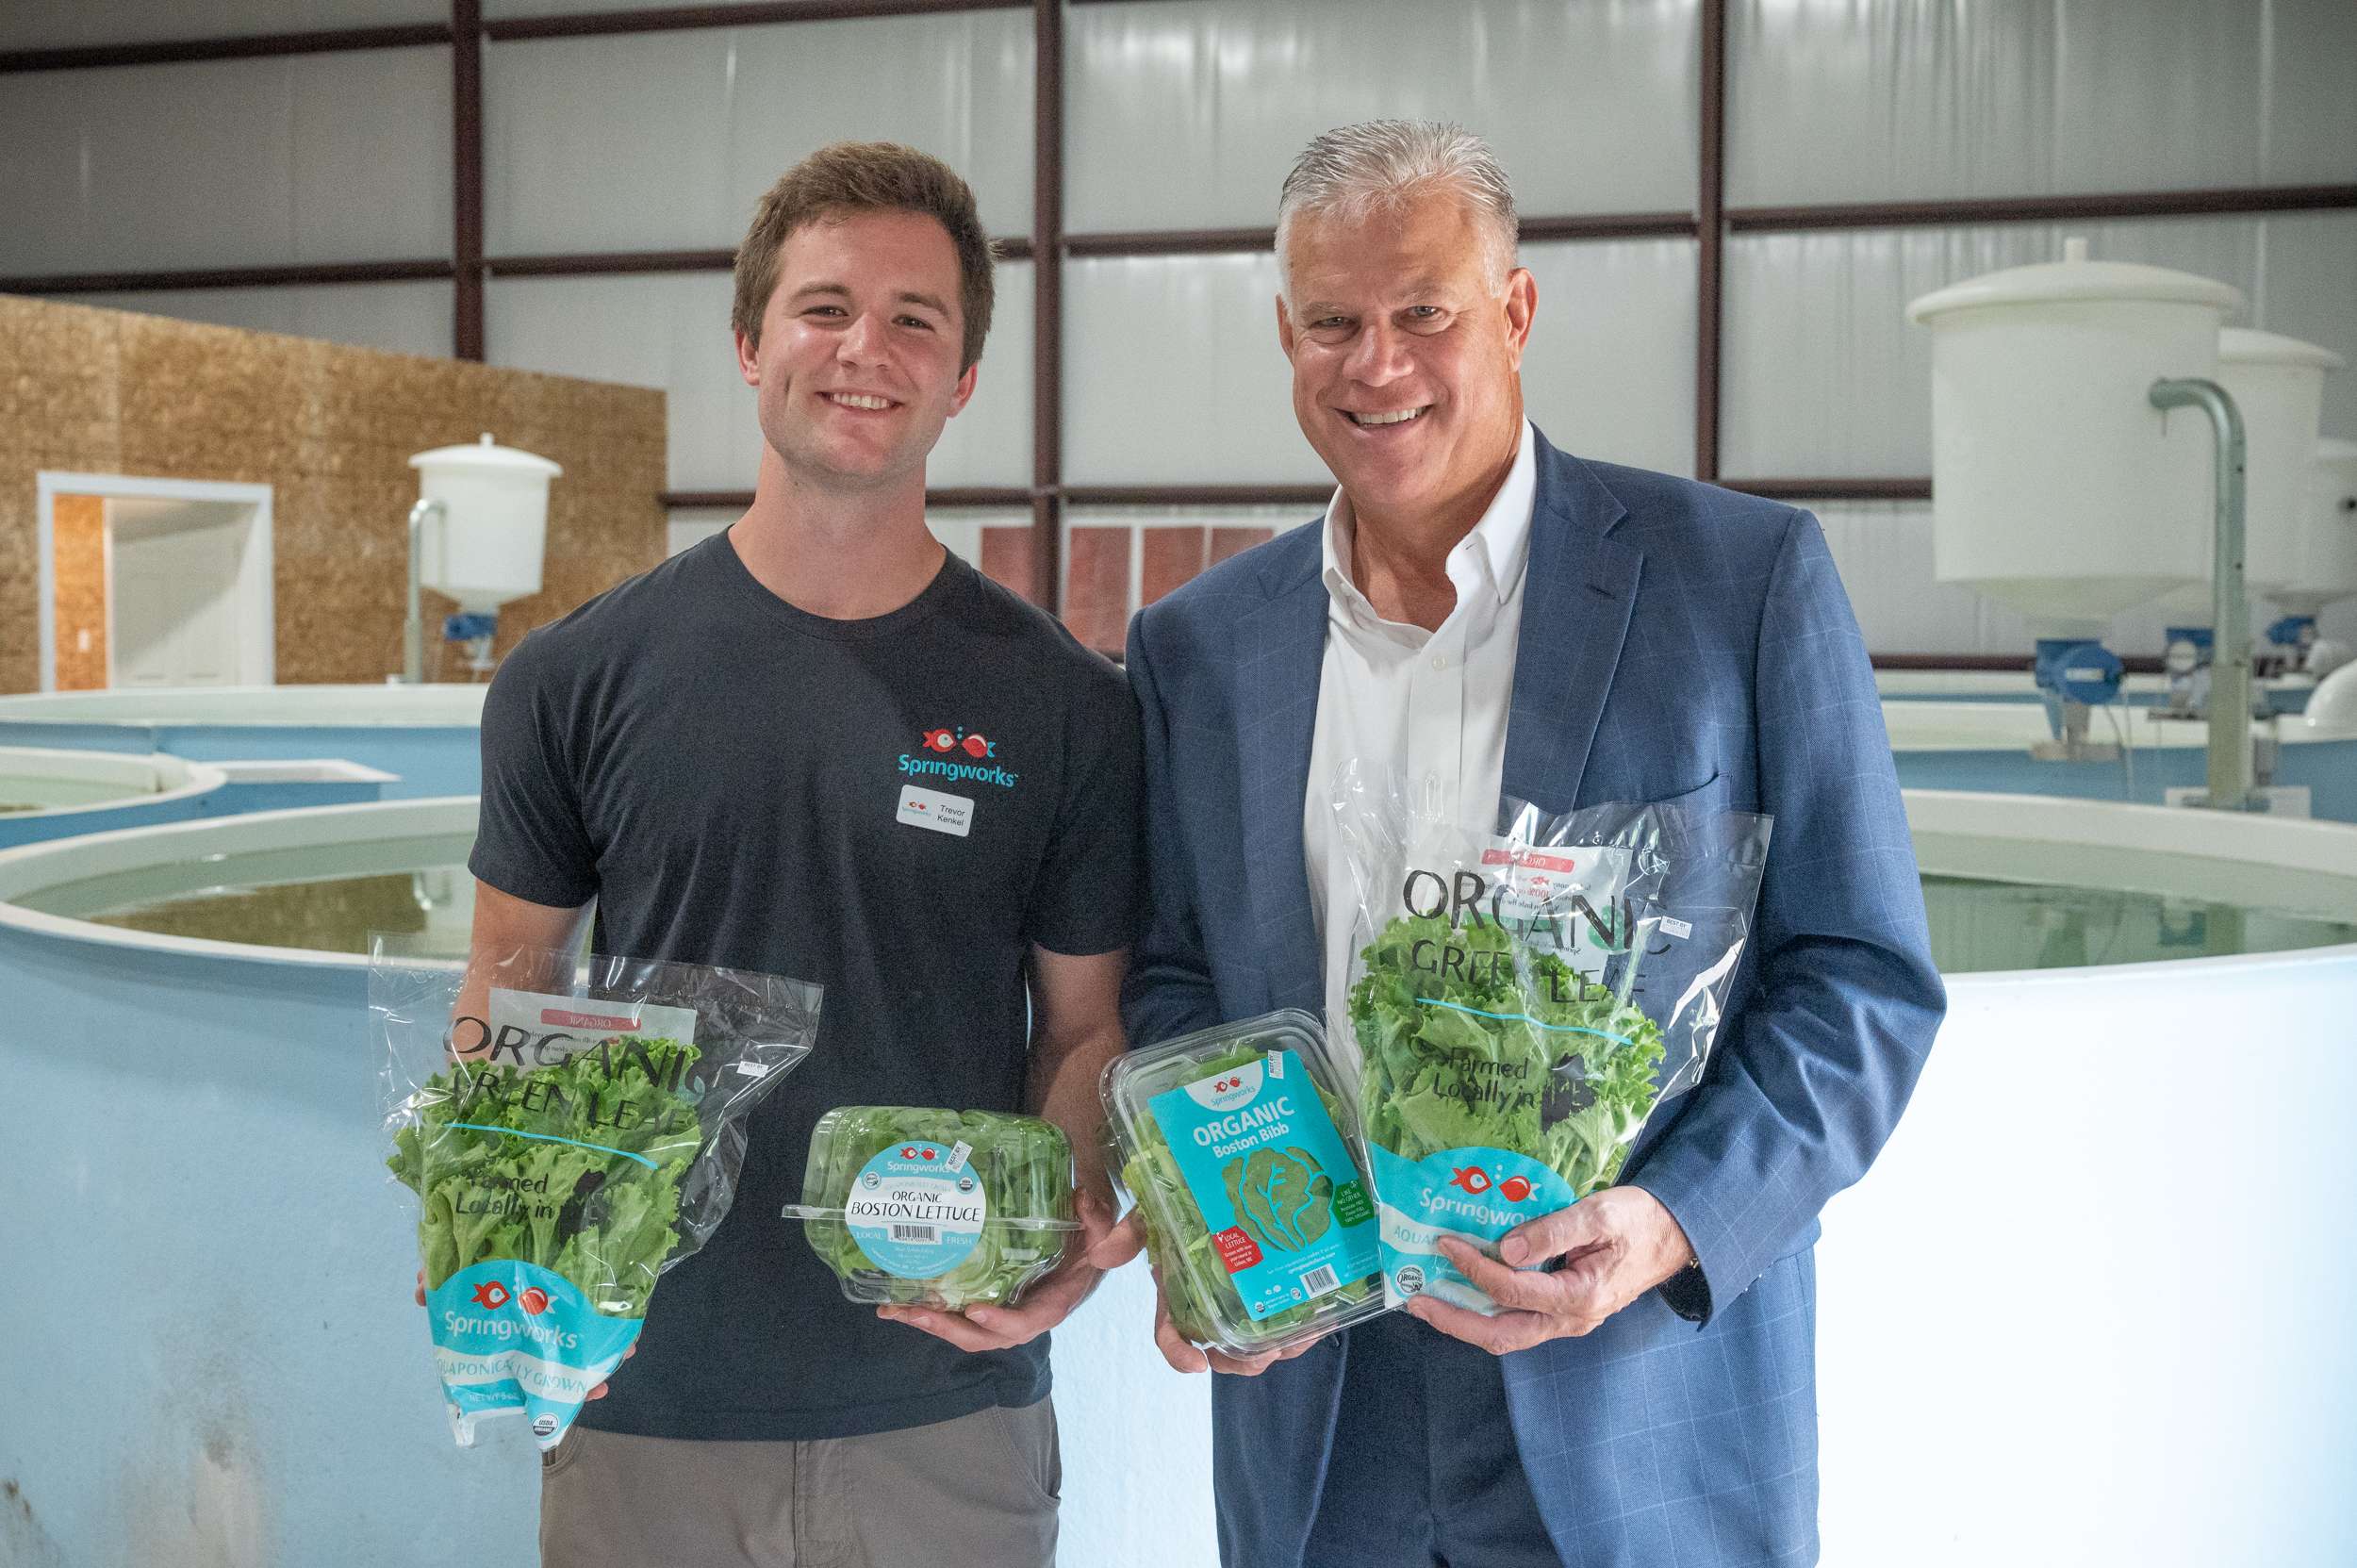 A young man holds two bags of lettuce that say Springworks Farm on them next to an older man, also holding two bags of lettuce